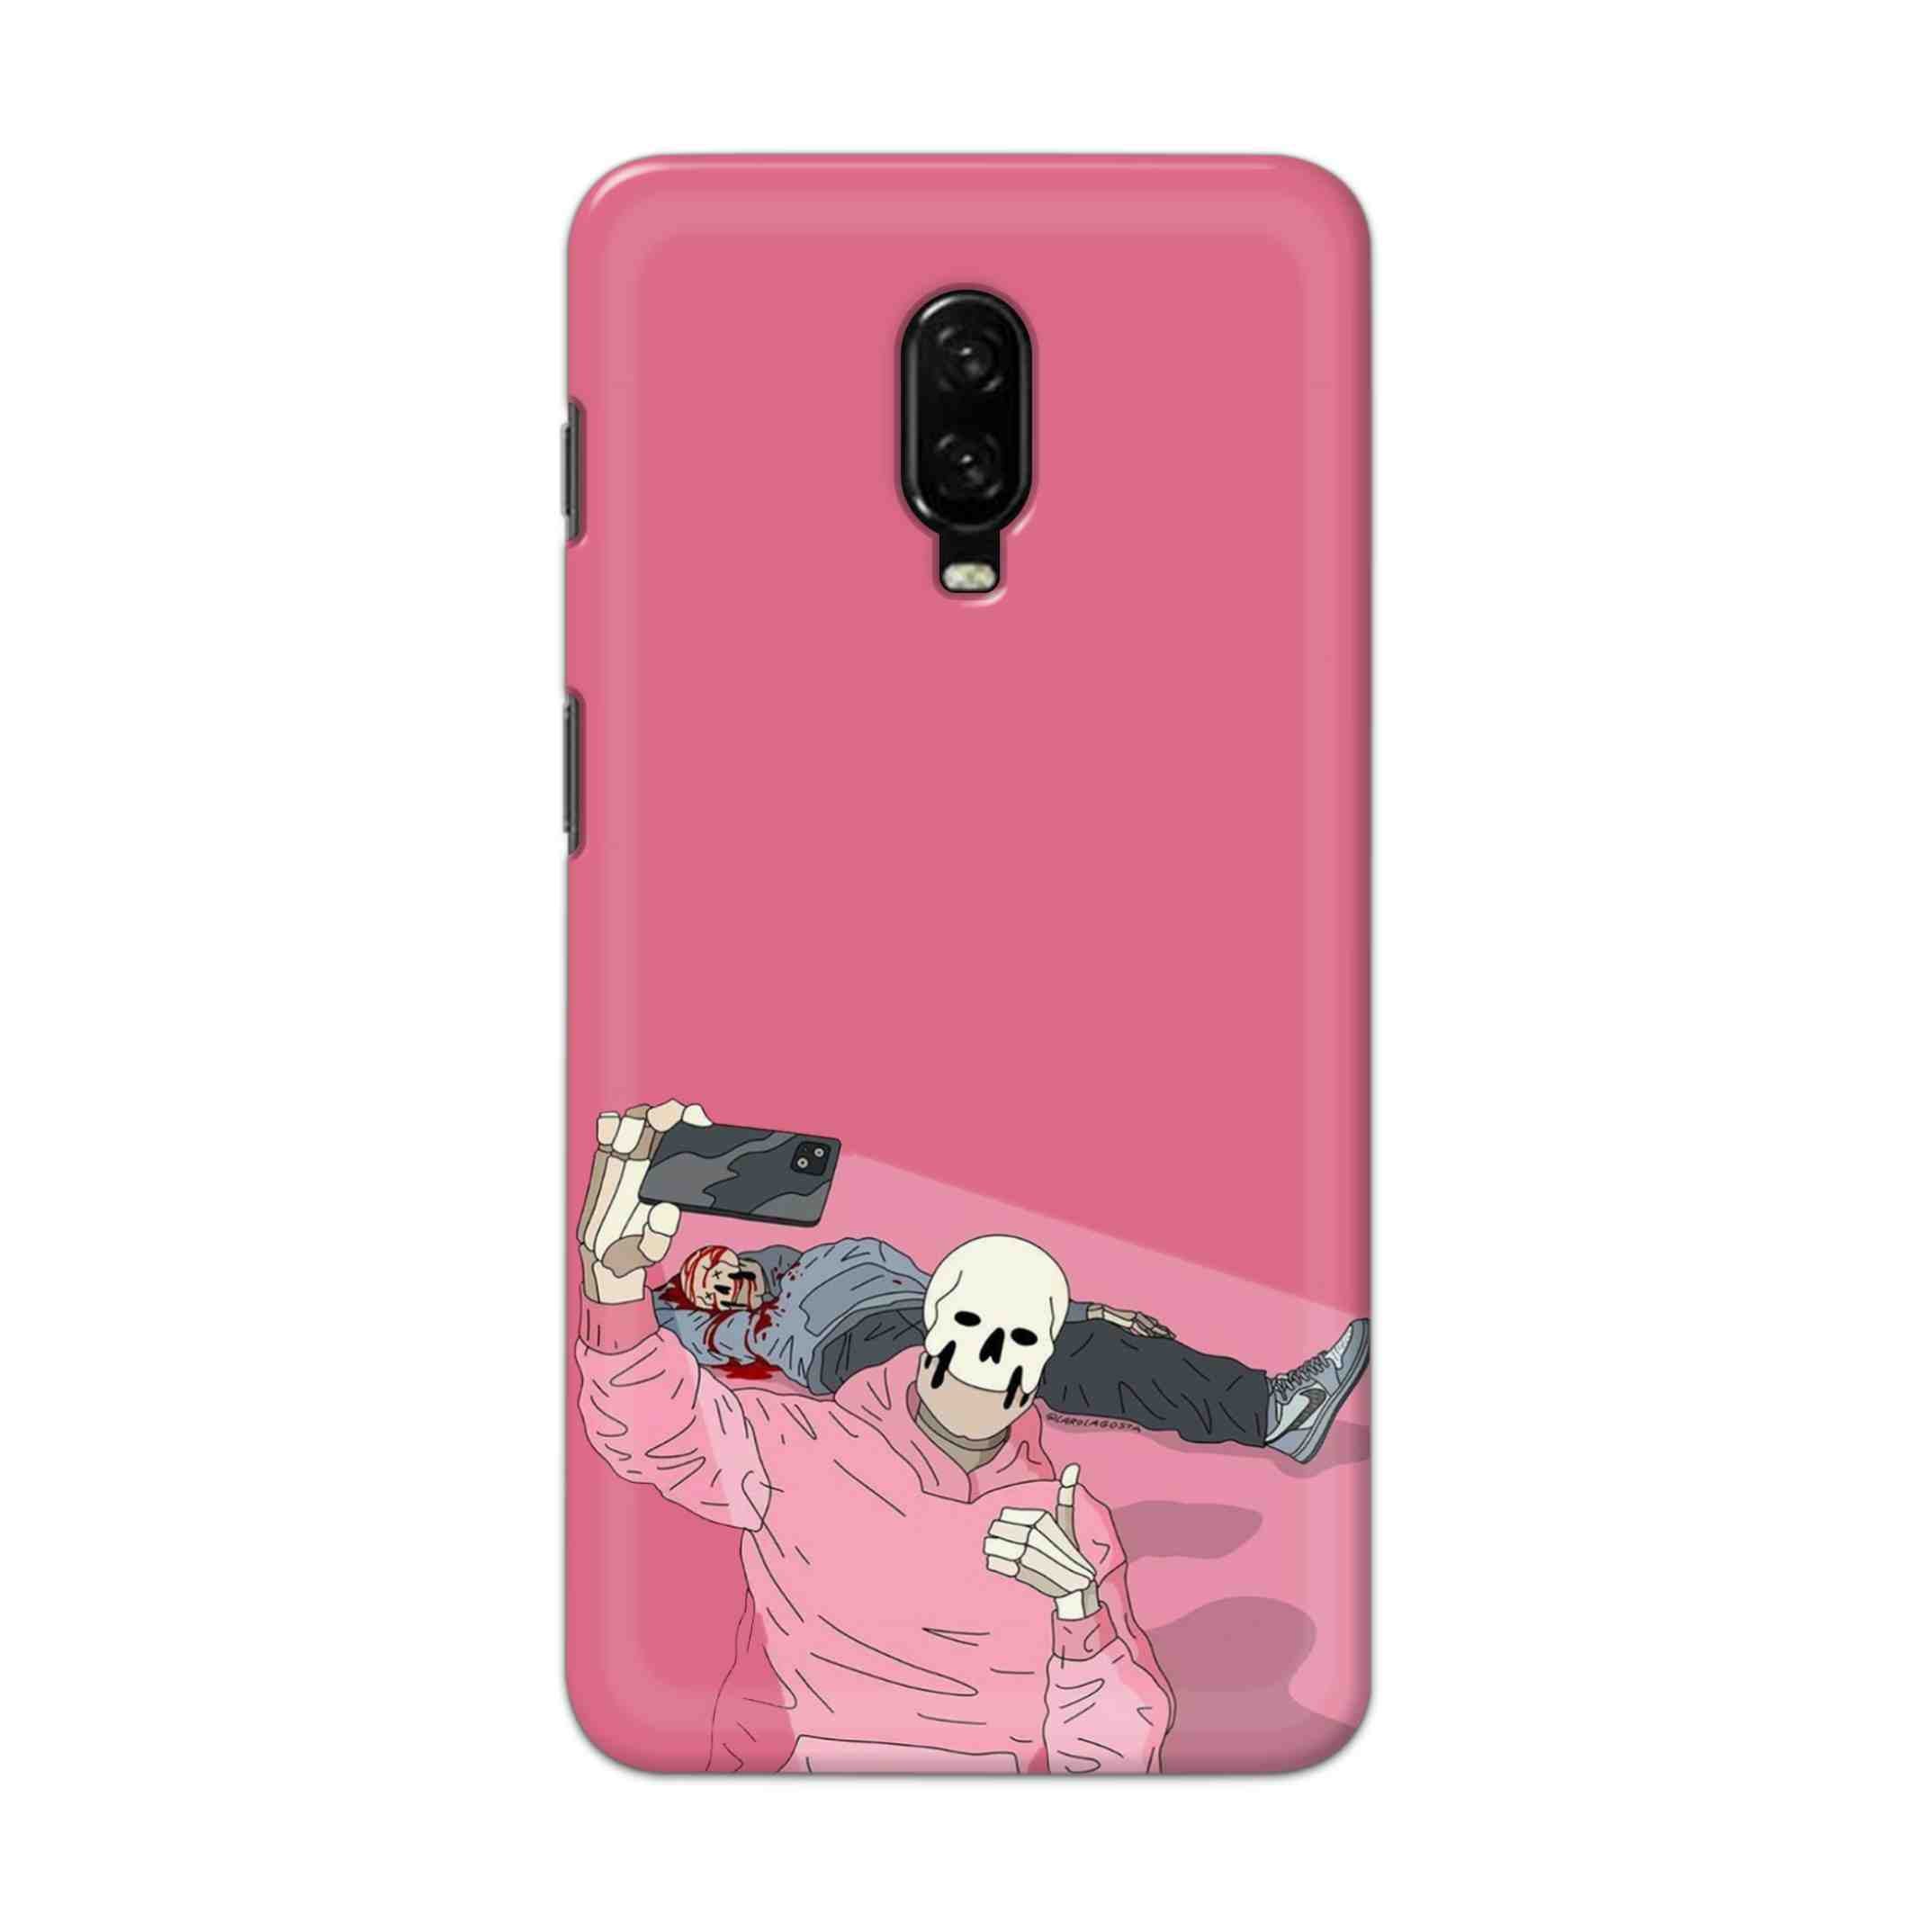 Buy Selfie Hard Back Mobile Phone Case Cover For OnePlus 6T Online